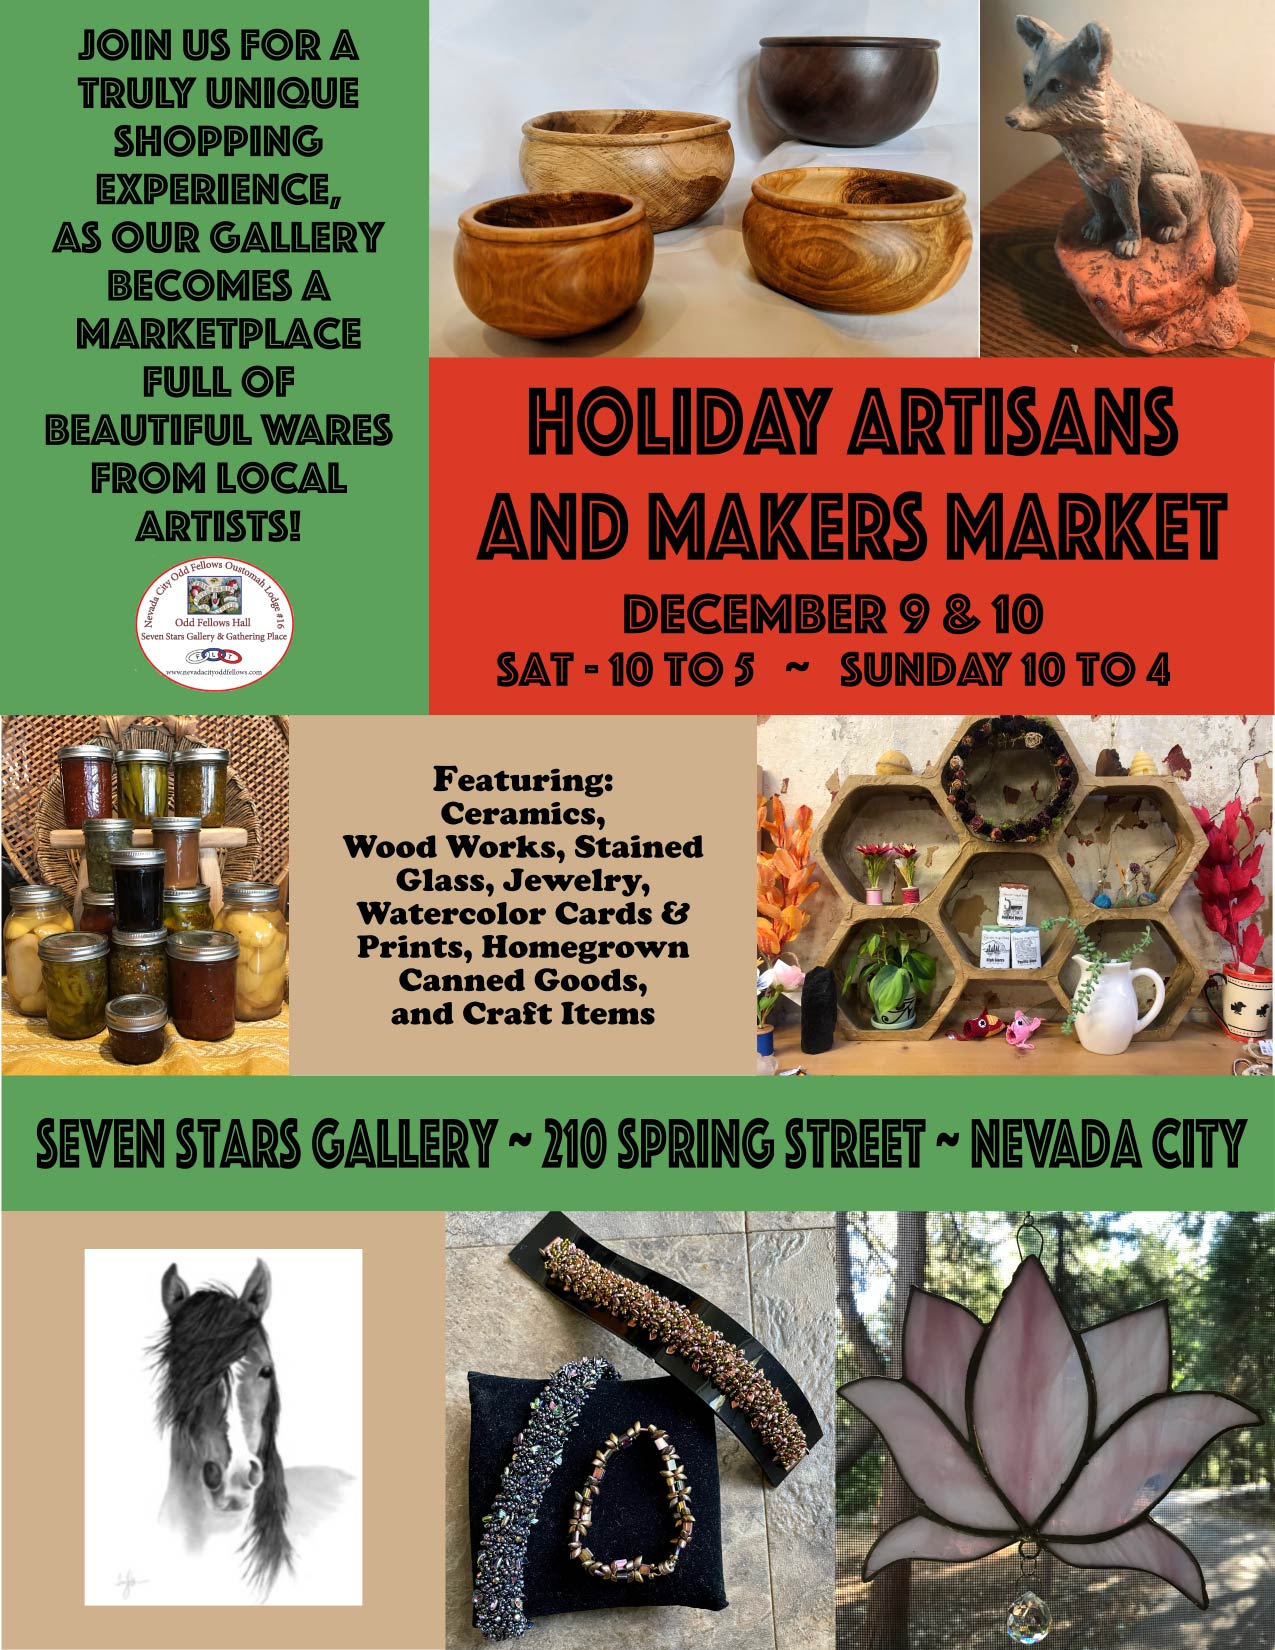 On Sunday 14 January from 11 AM to 5 PM the Nevada City Odd